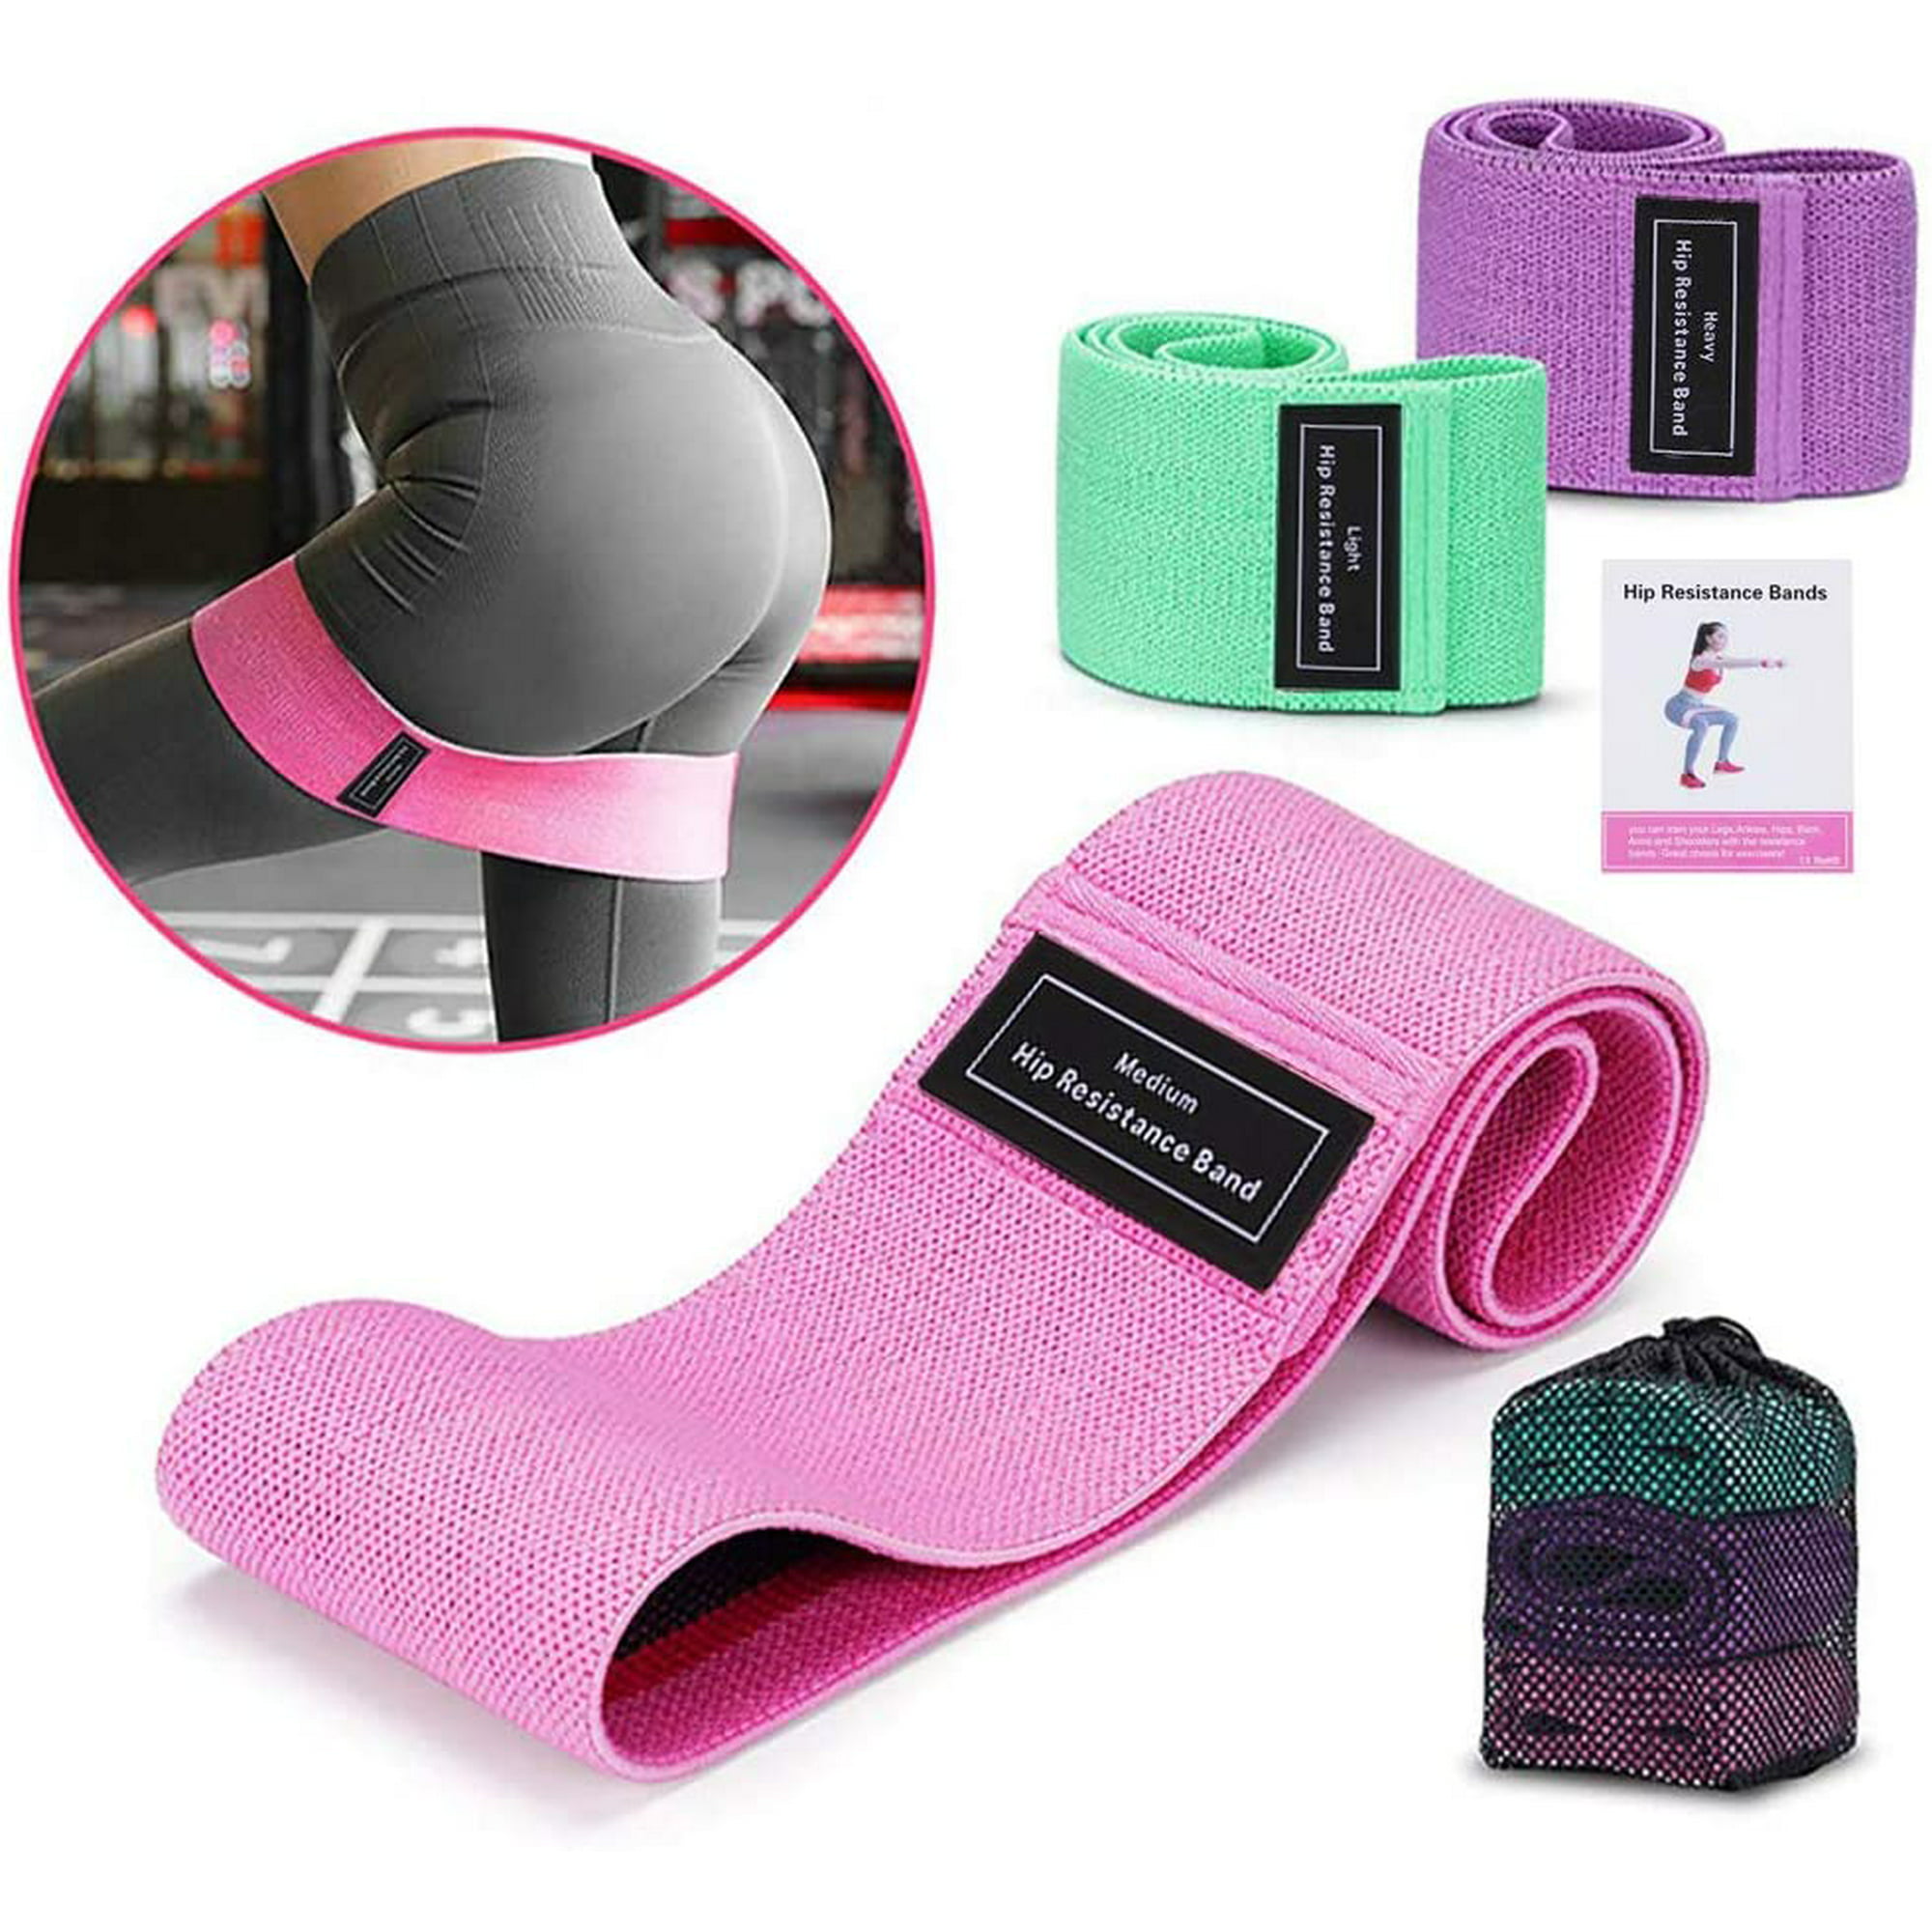 Thick Wide Non- Slip Exercise and Fitness Bands Women/Men Stretch and Workout Loops Booty Bands Stretch Bands Resistance Bands Set for Women Butt and Legs Workout 